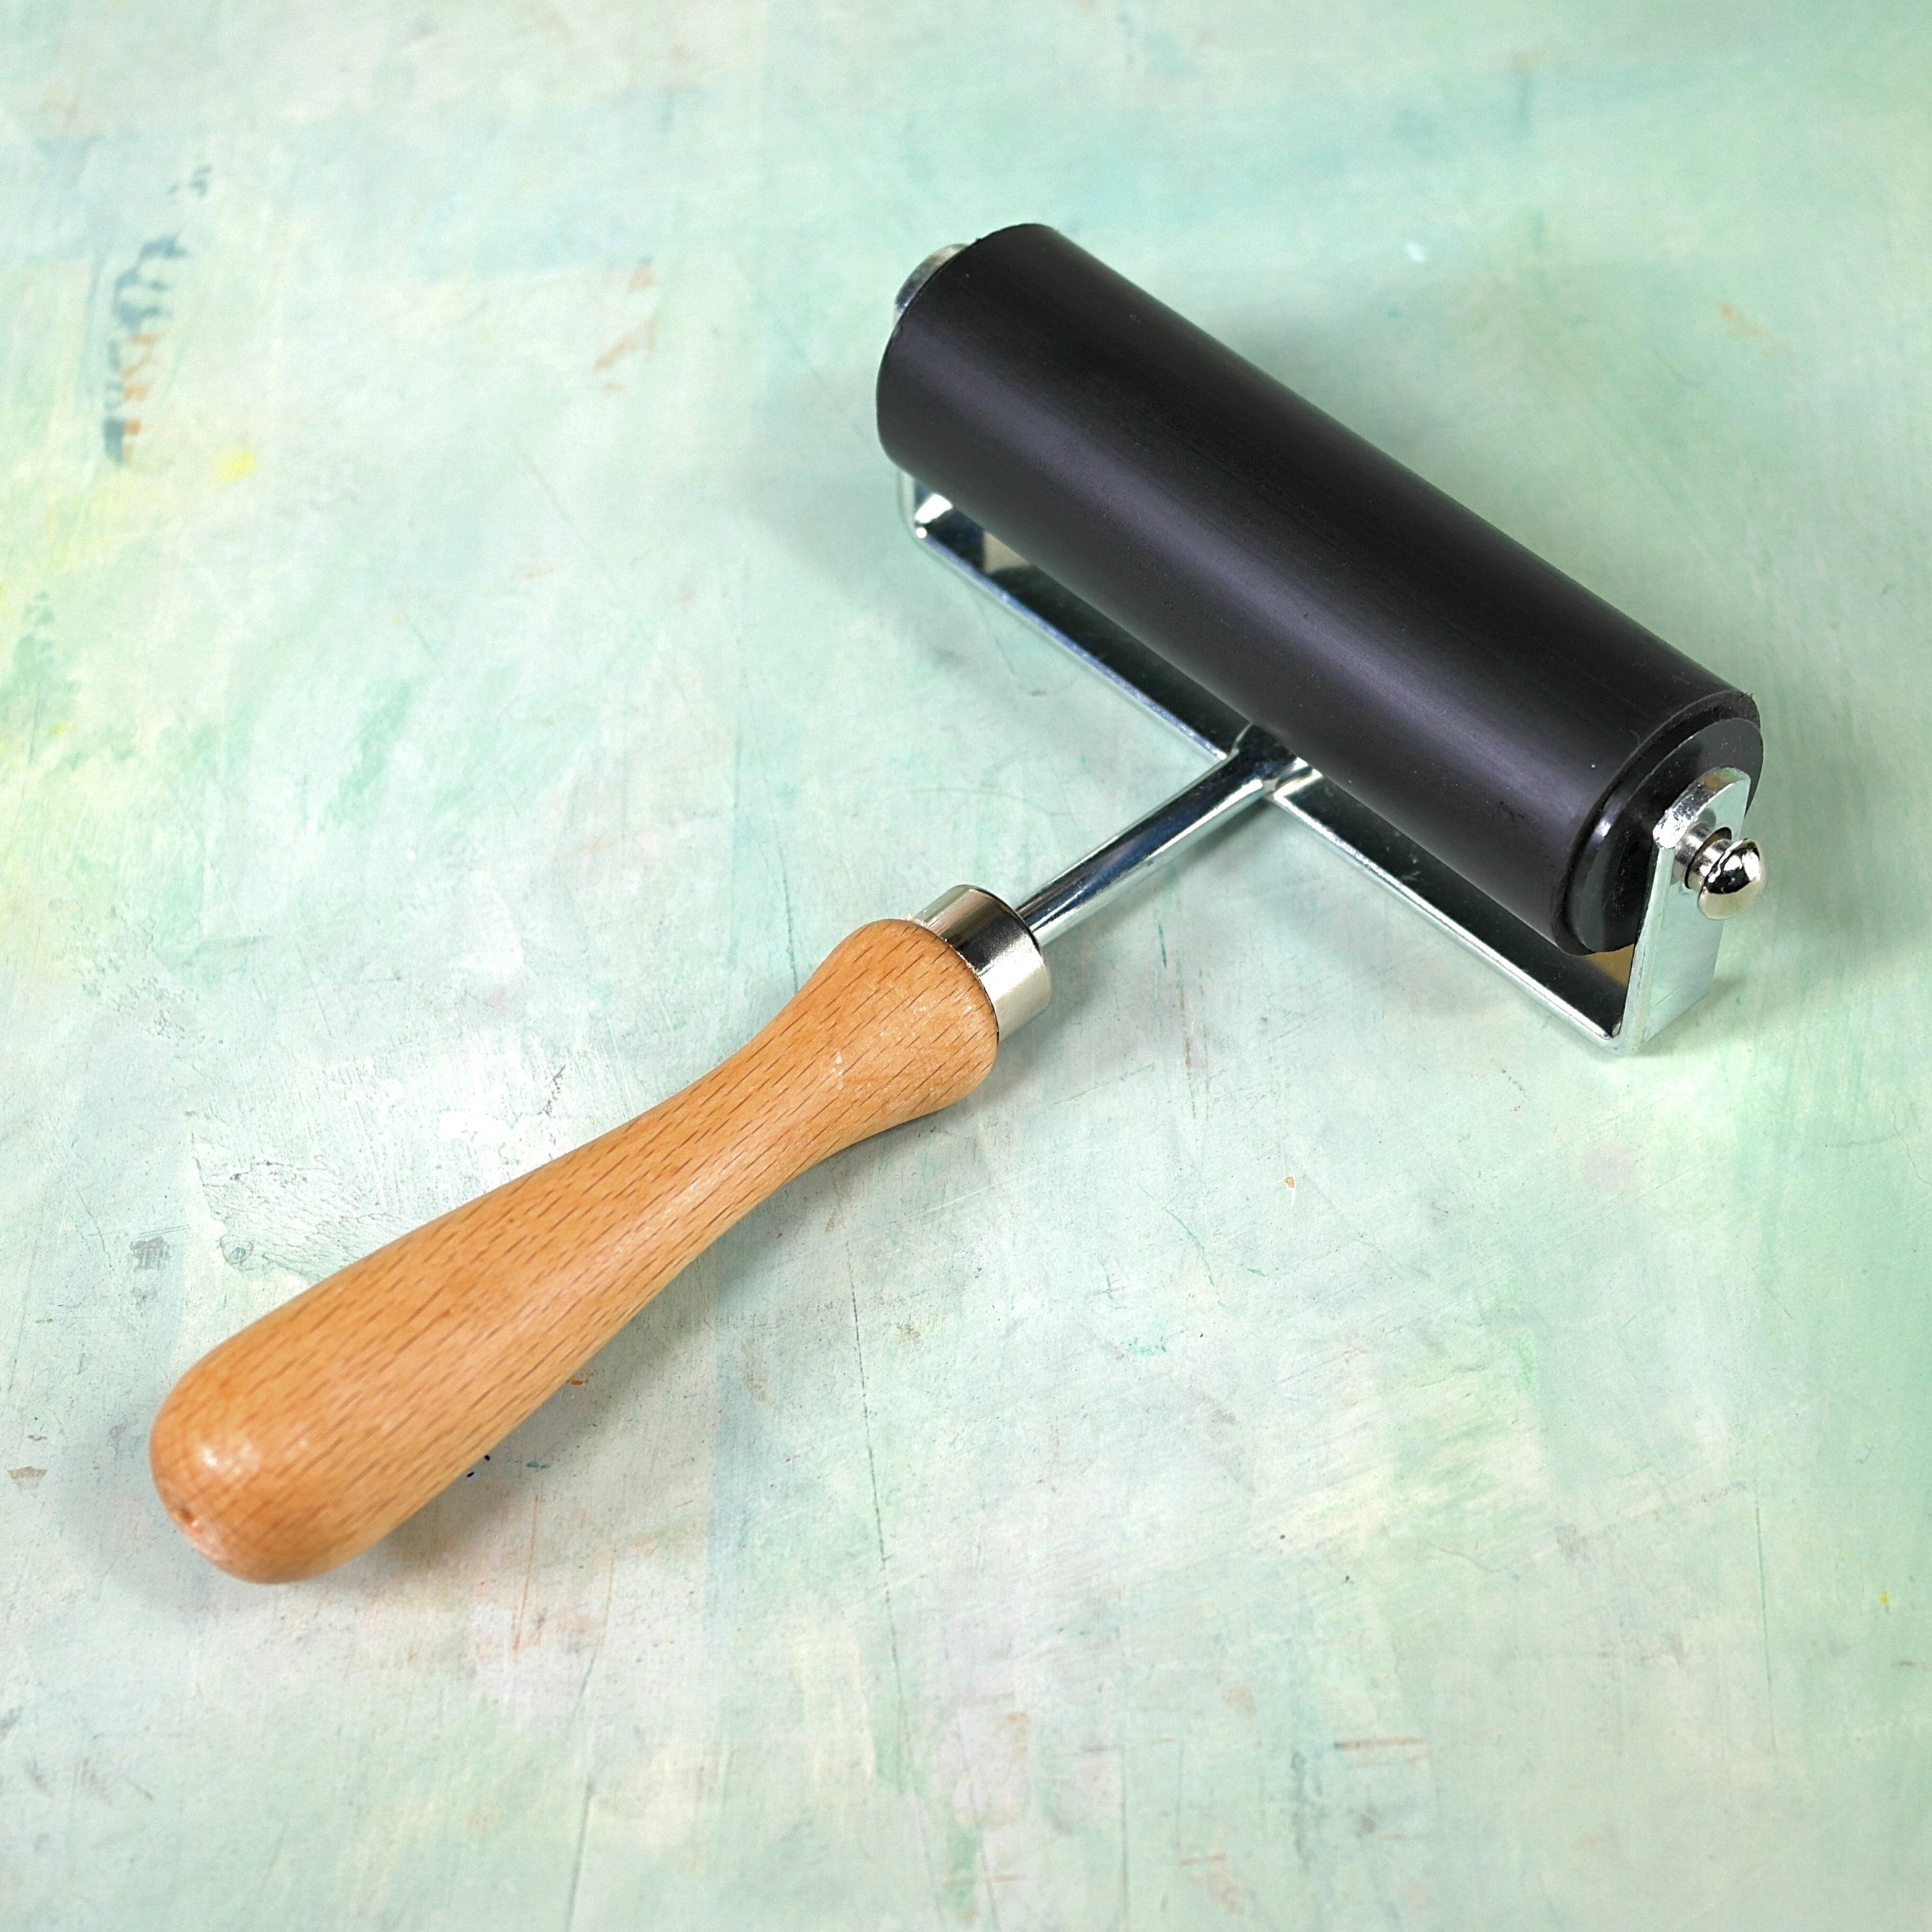 So I broke my brayer yesterday currently using it like this